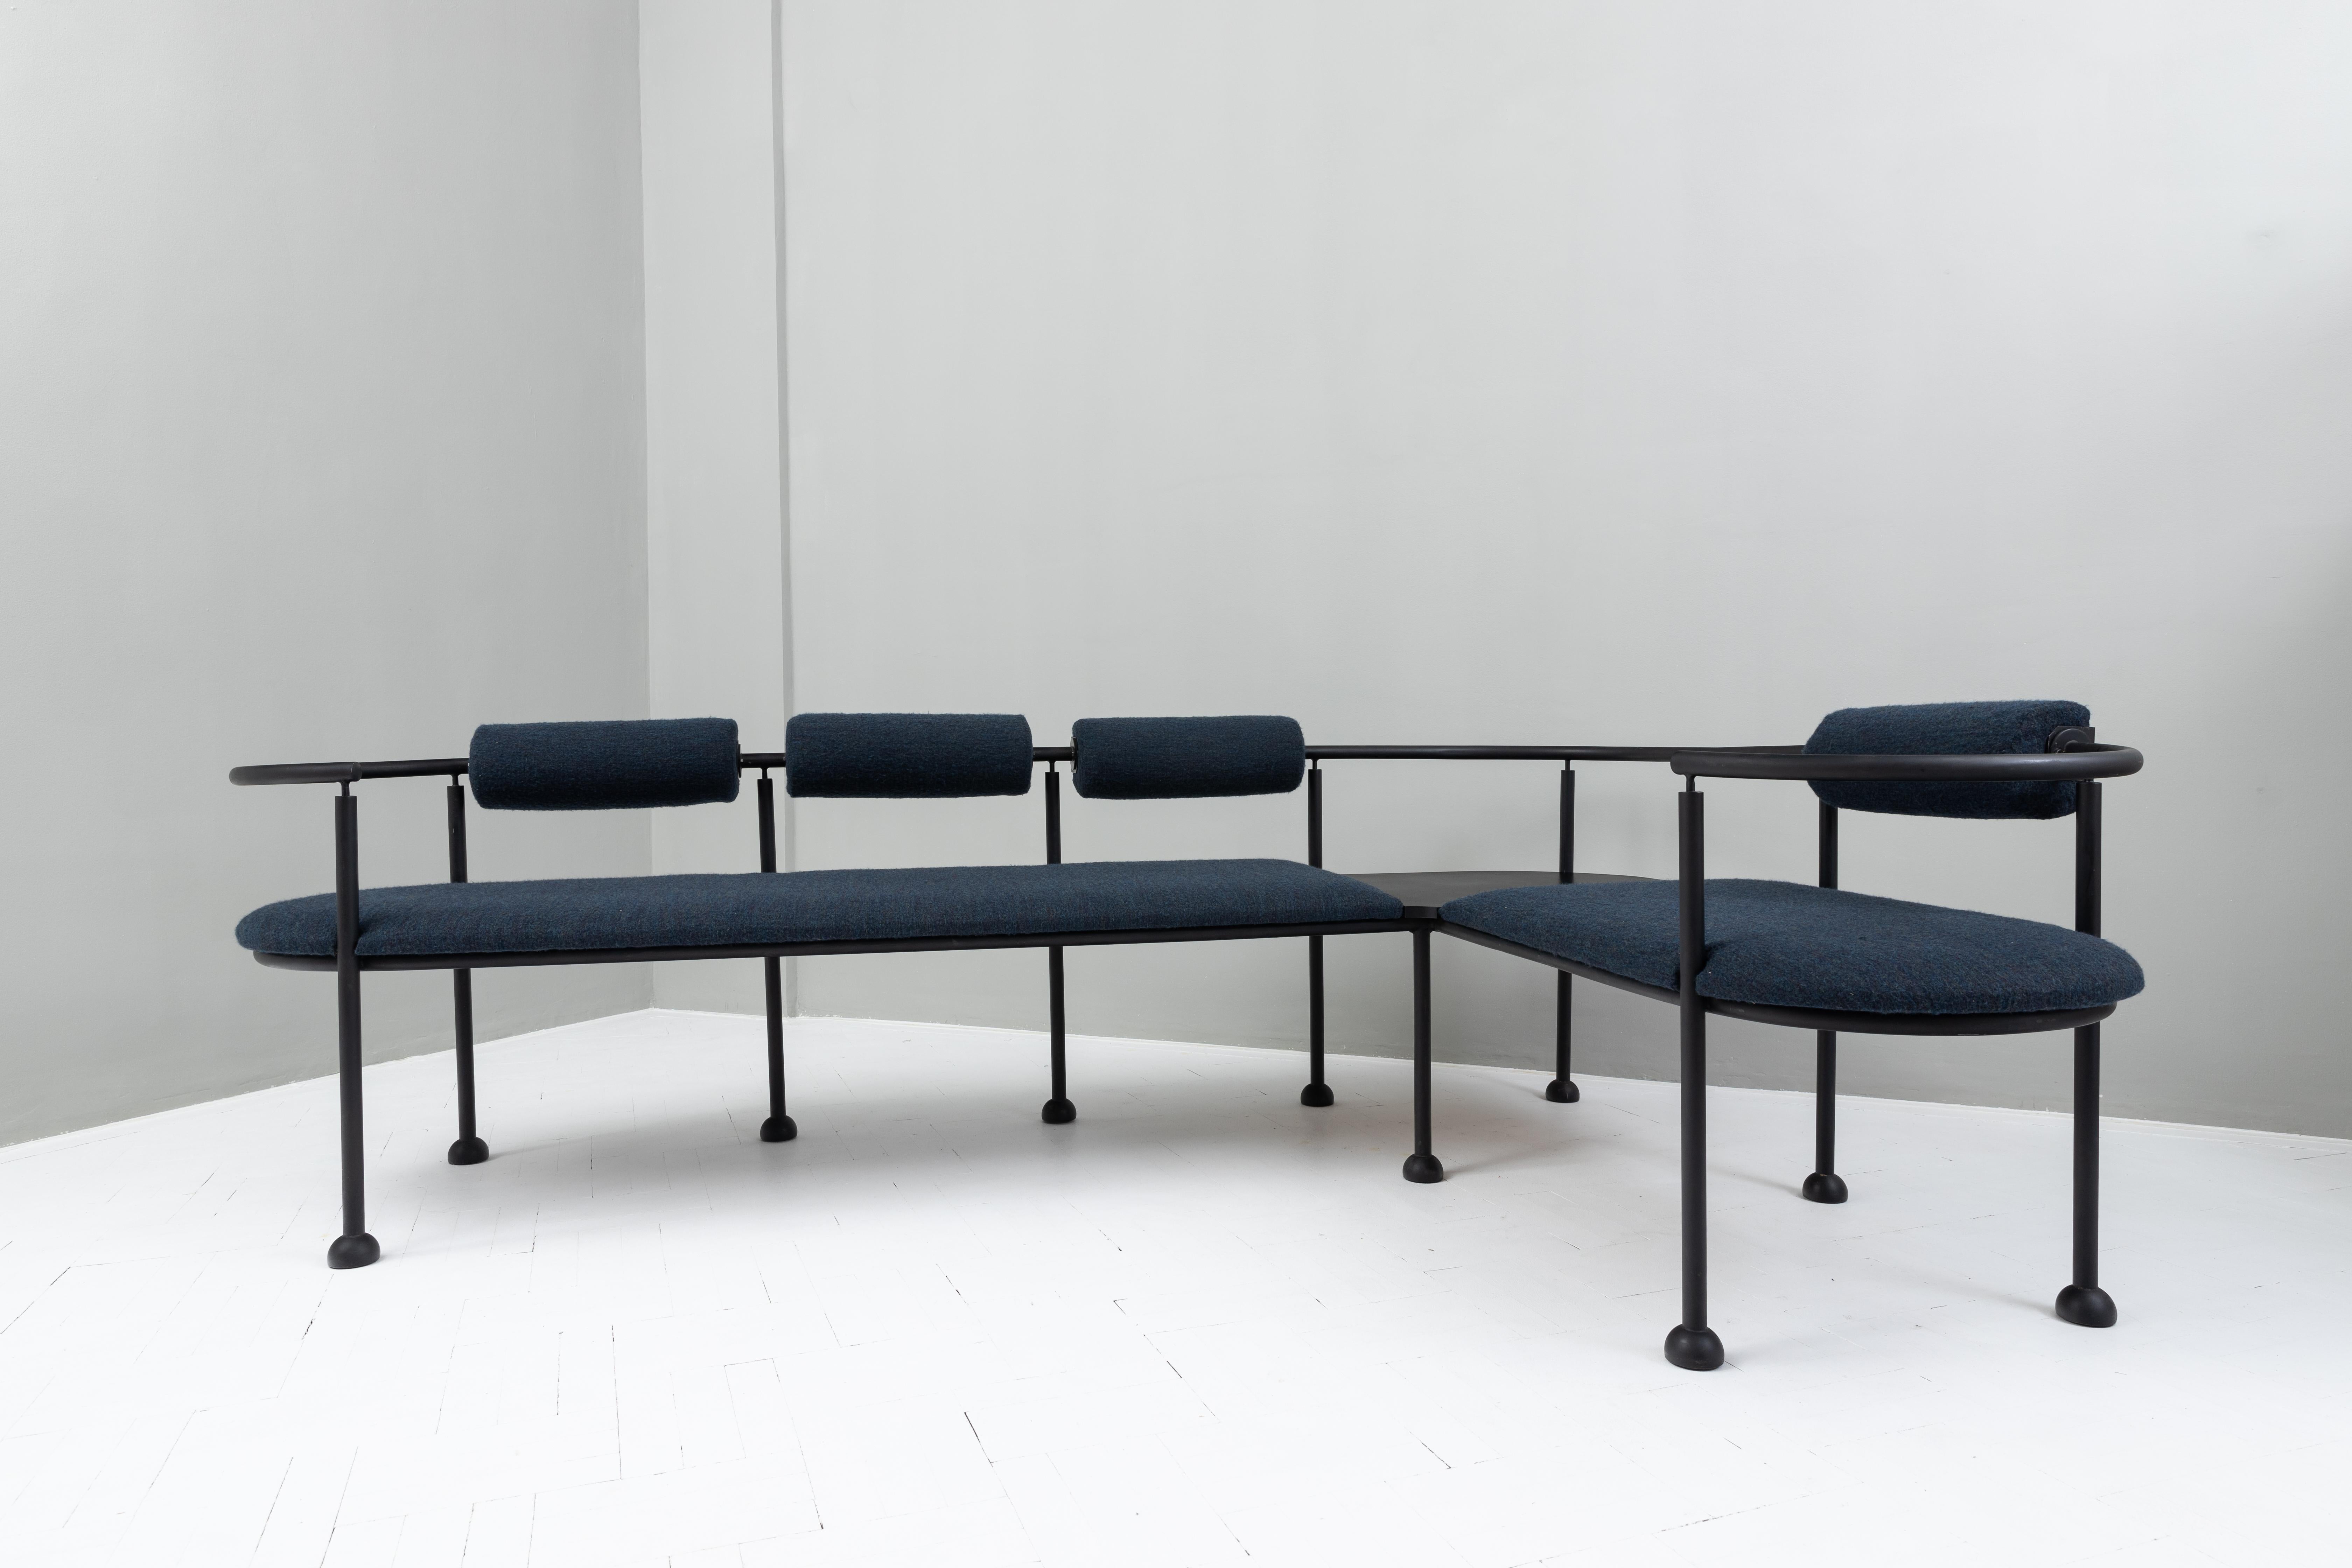 The postmodern corner bench was designed in the 1980s. It's made of a black metal structure, with a bench seat and back upholstery.

Unknown designer
